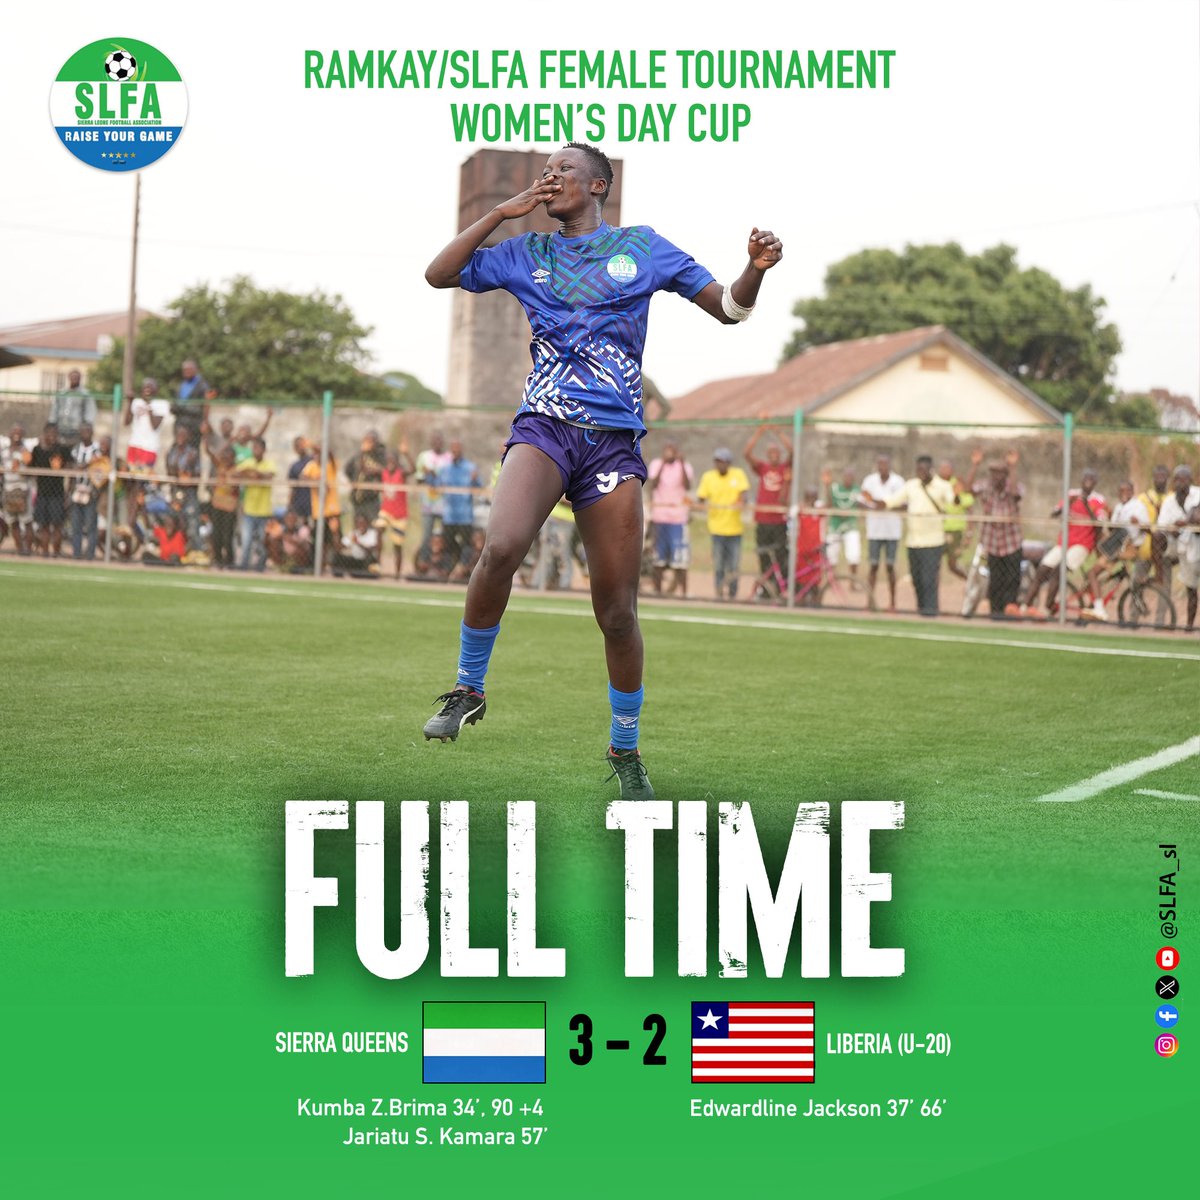 Congratulations to Sierra Queens for clinching another impressive victory against Liberia in the Women’s Day Cup in Kenema! With wins in both their first two matches, the team is showcasing incredible skill and determination. Keep shining, Queens! #SierraLeone #WomensDayCup